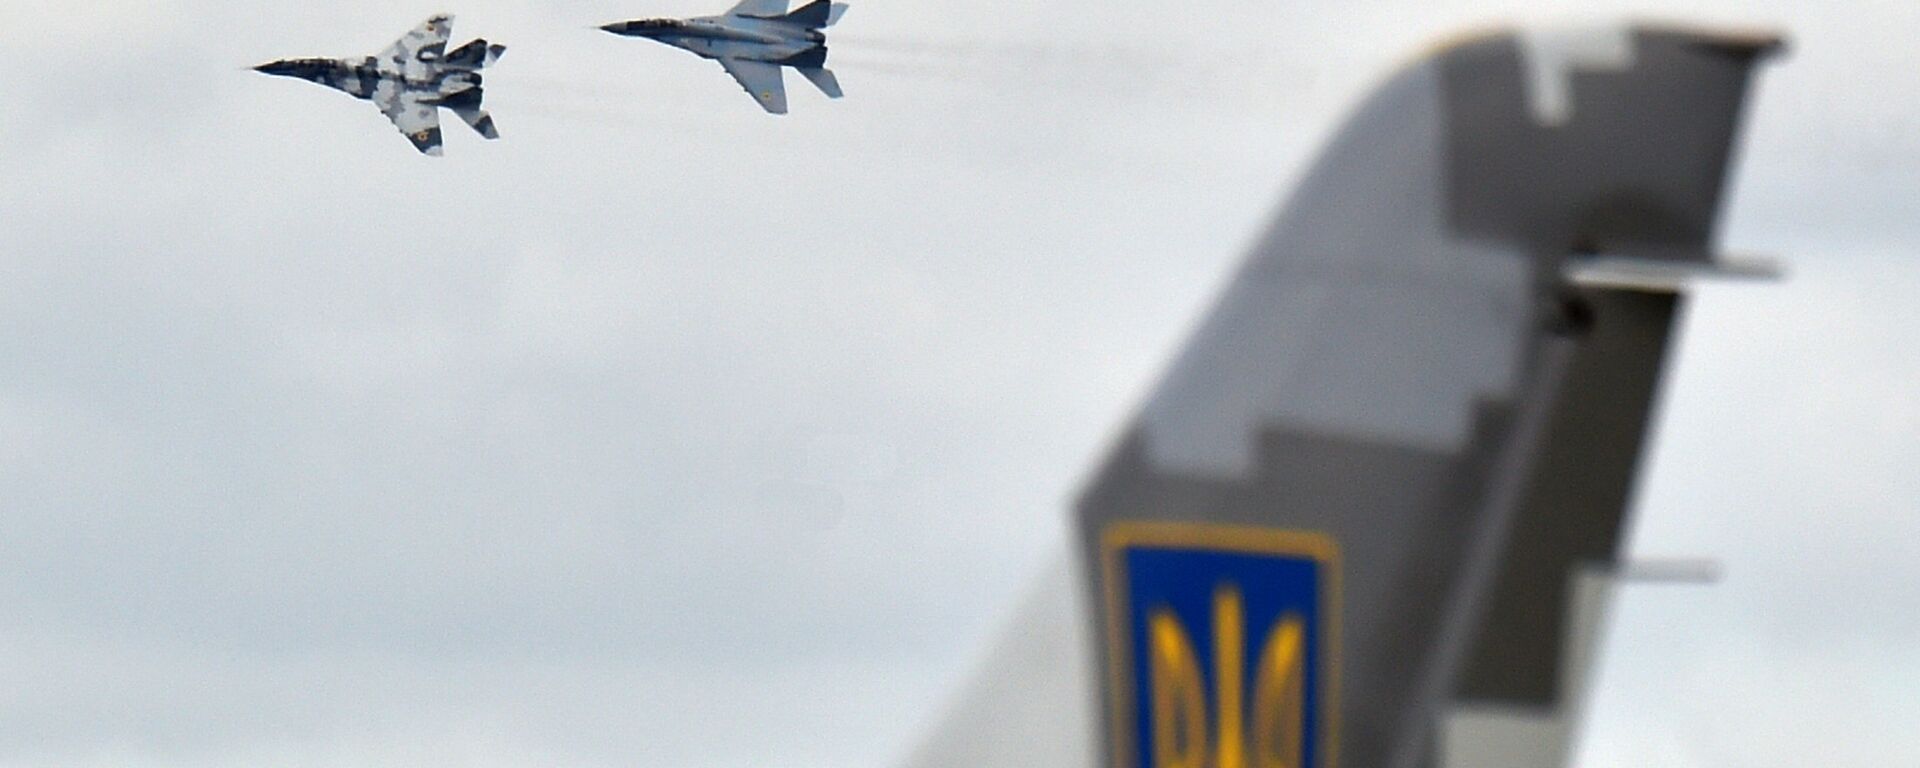 Ukrainian Air force MIG 29 fighter planes take part in practical flights during an exercise at the Air Force military base in Vasylkiv, some 40km from Kiev on August 3, 2016 - Sputnik International, 1920, 06.03.2022